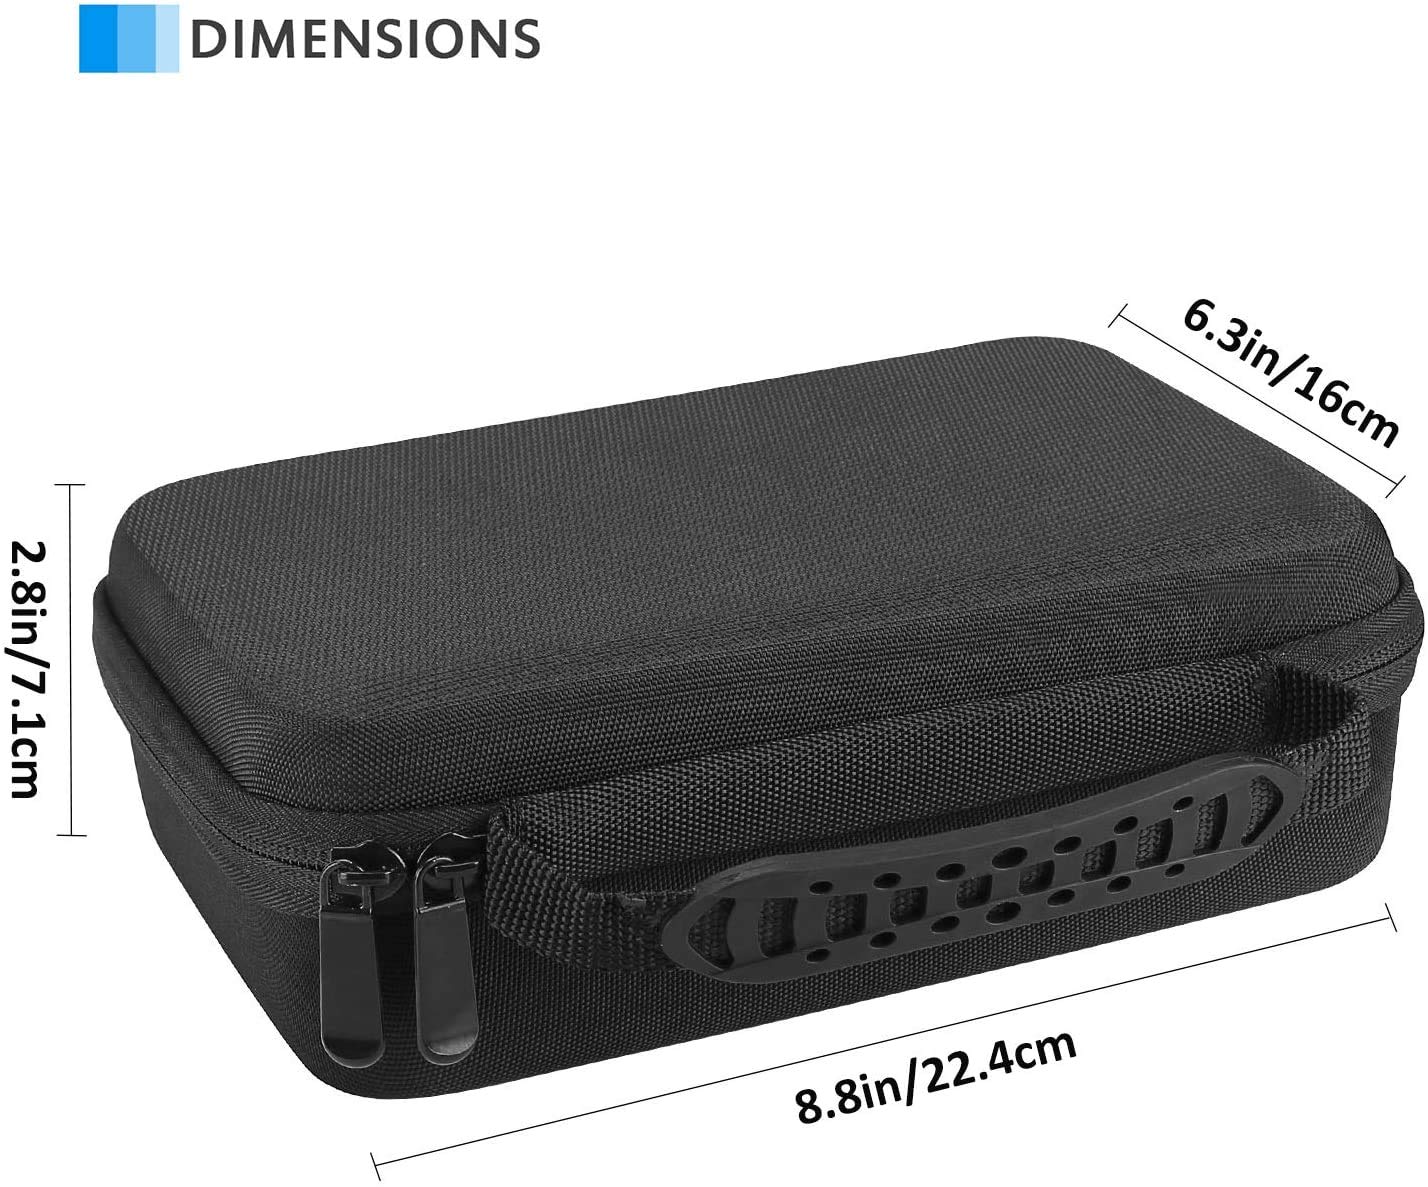 ProCase Hard Travel Case for Multigroom Series 3000 5000 7000 MG3750 MG5750/49 MG7750/49 Men's Electric Trimmer Shaver and Attachments Father's Day Gift -Black